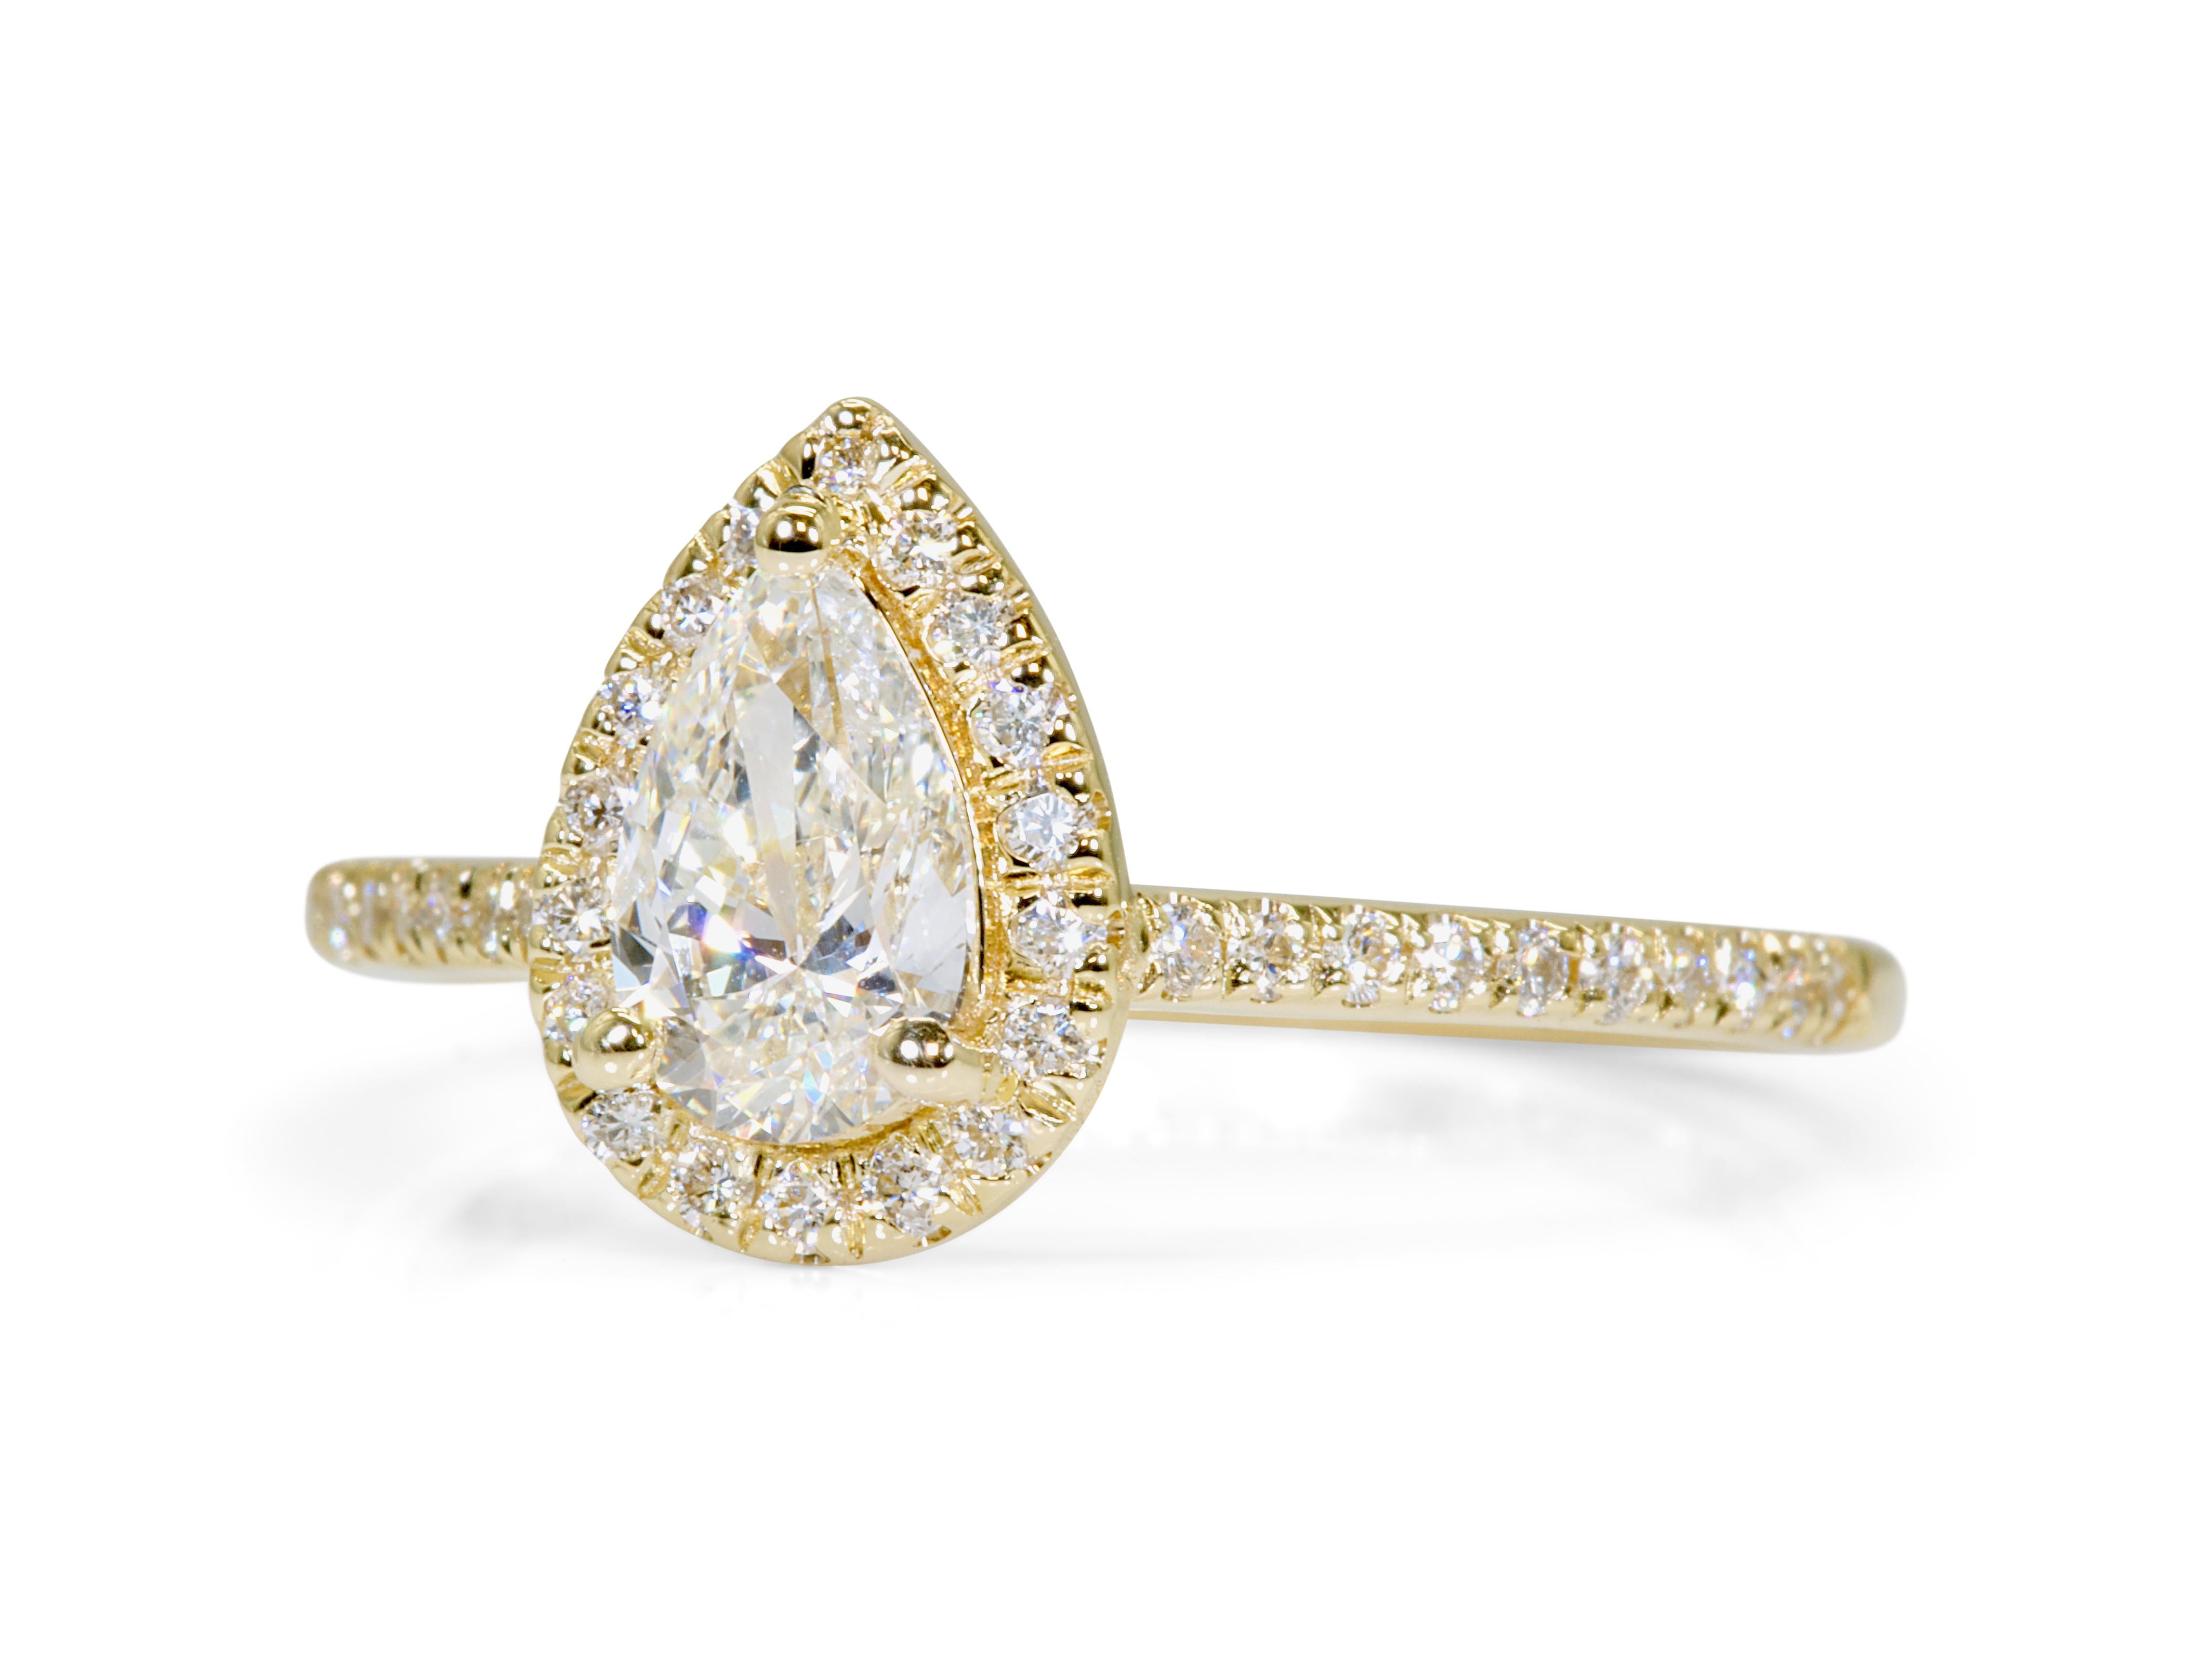 Pear Cut Dazzling 2.66ct Pear-Shaped Diamond Halo Ring in 18k Yellow Gold - GIA Certified For Sale